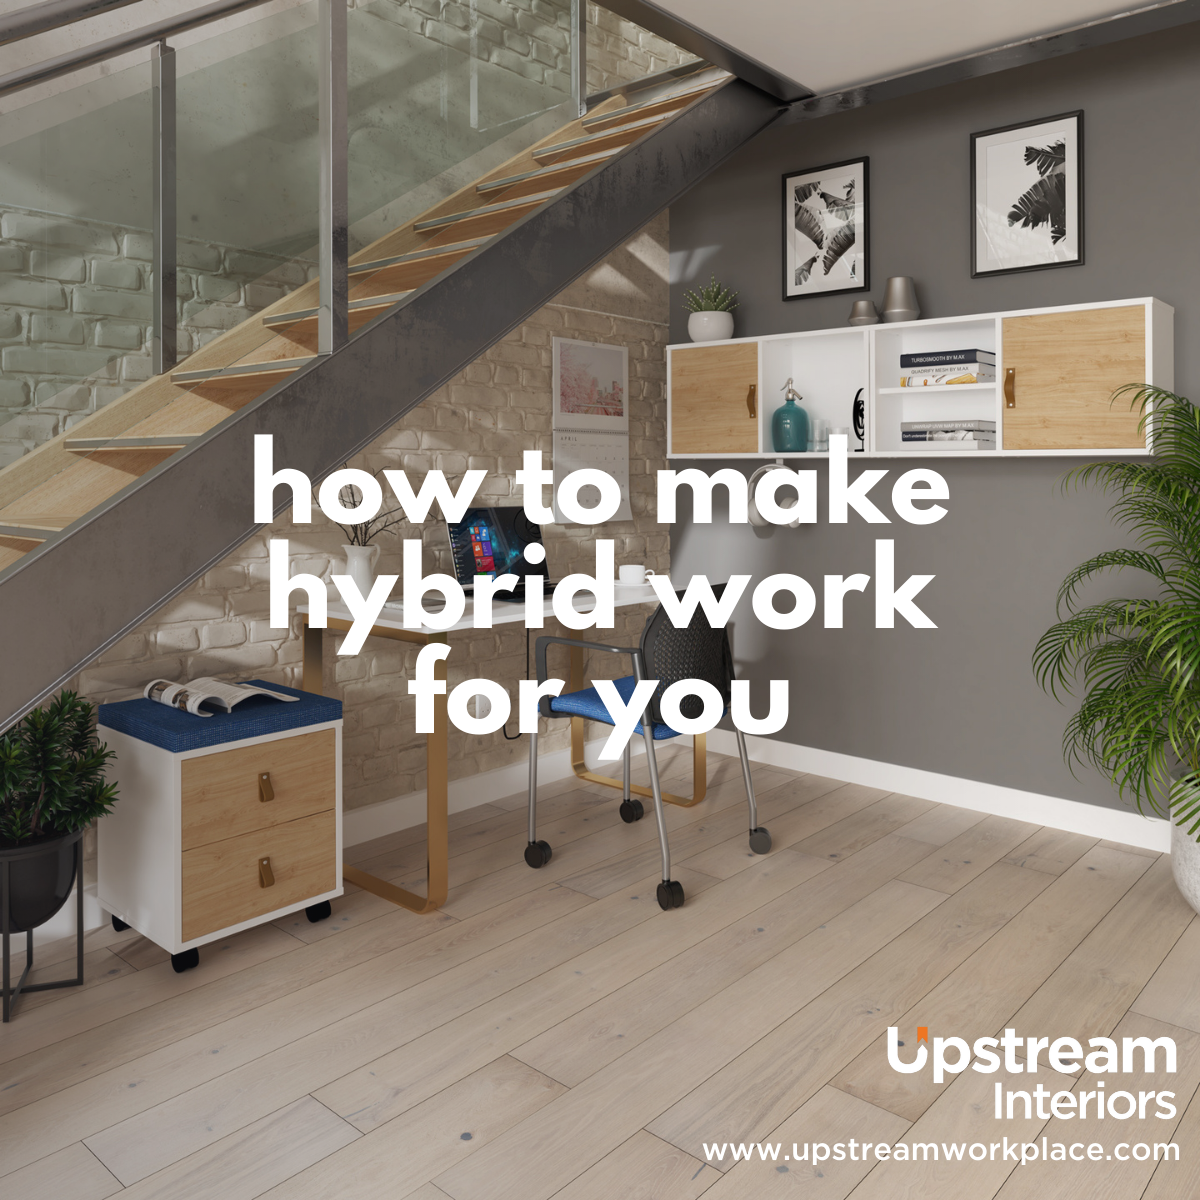 How to make hybrid work for you